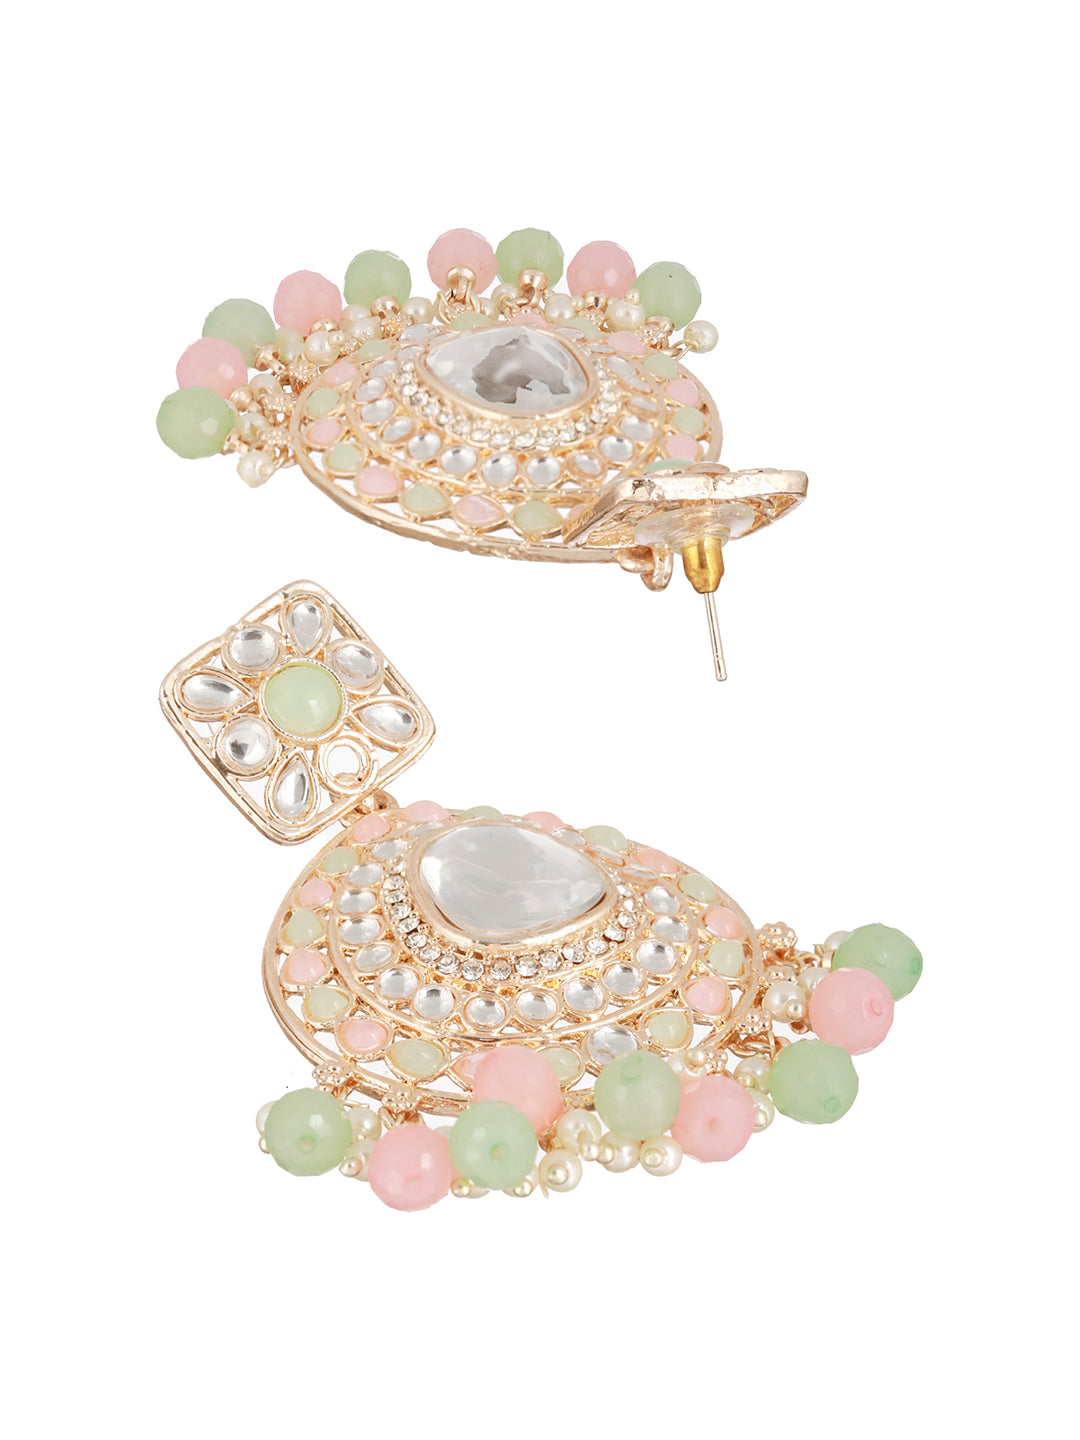 Pretty Pastel-Toned Studded Floral Beads Gold-Plated Drop Earrings